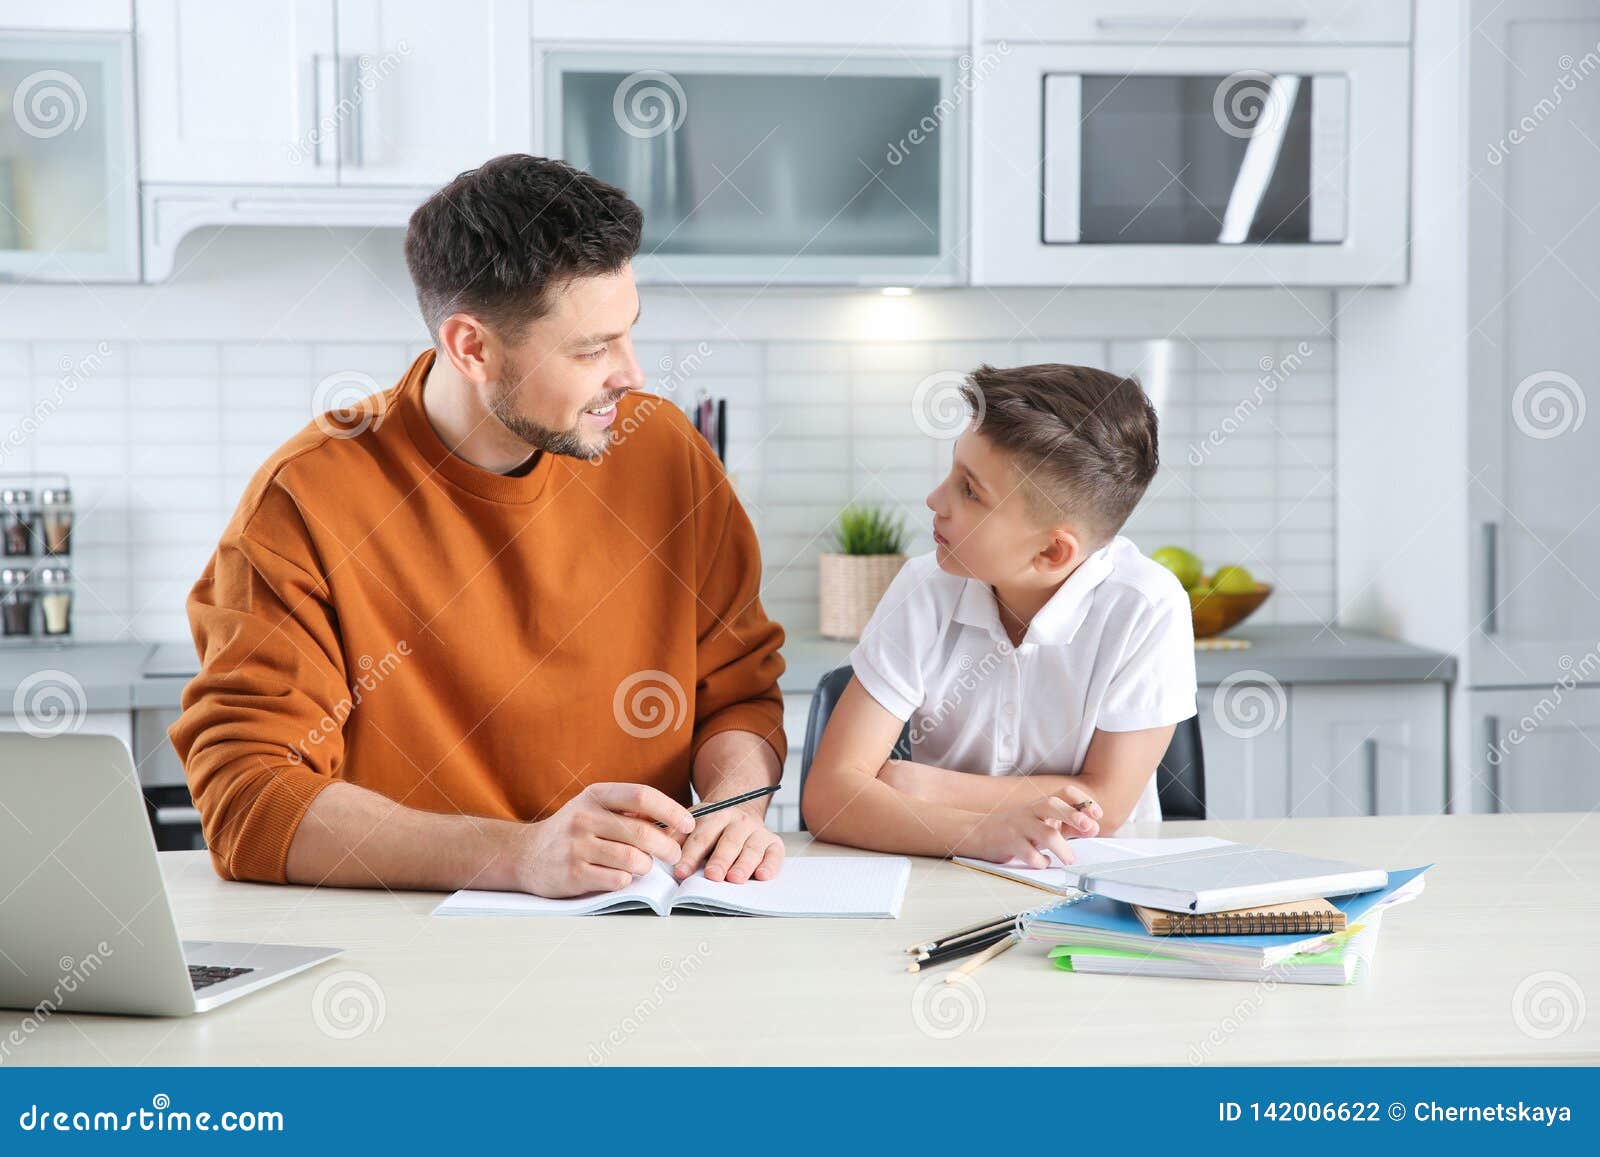 dad helping son with homework